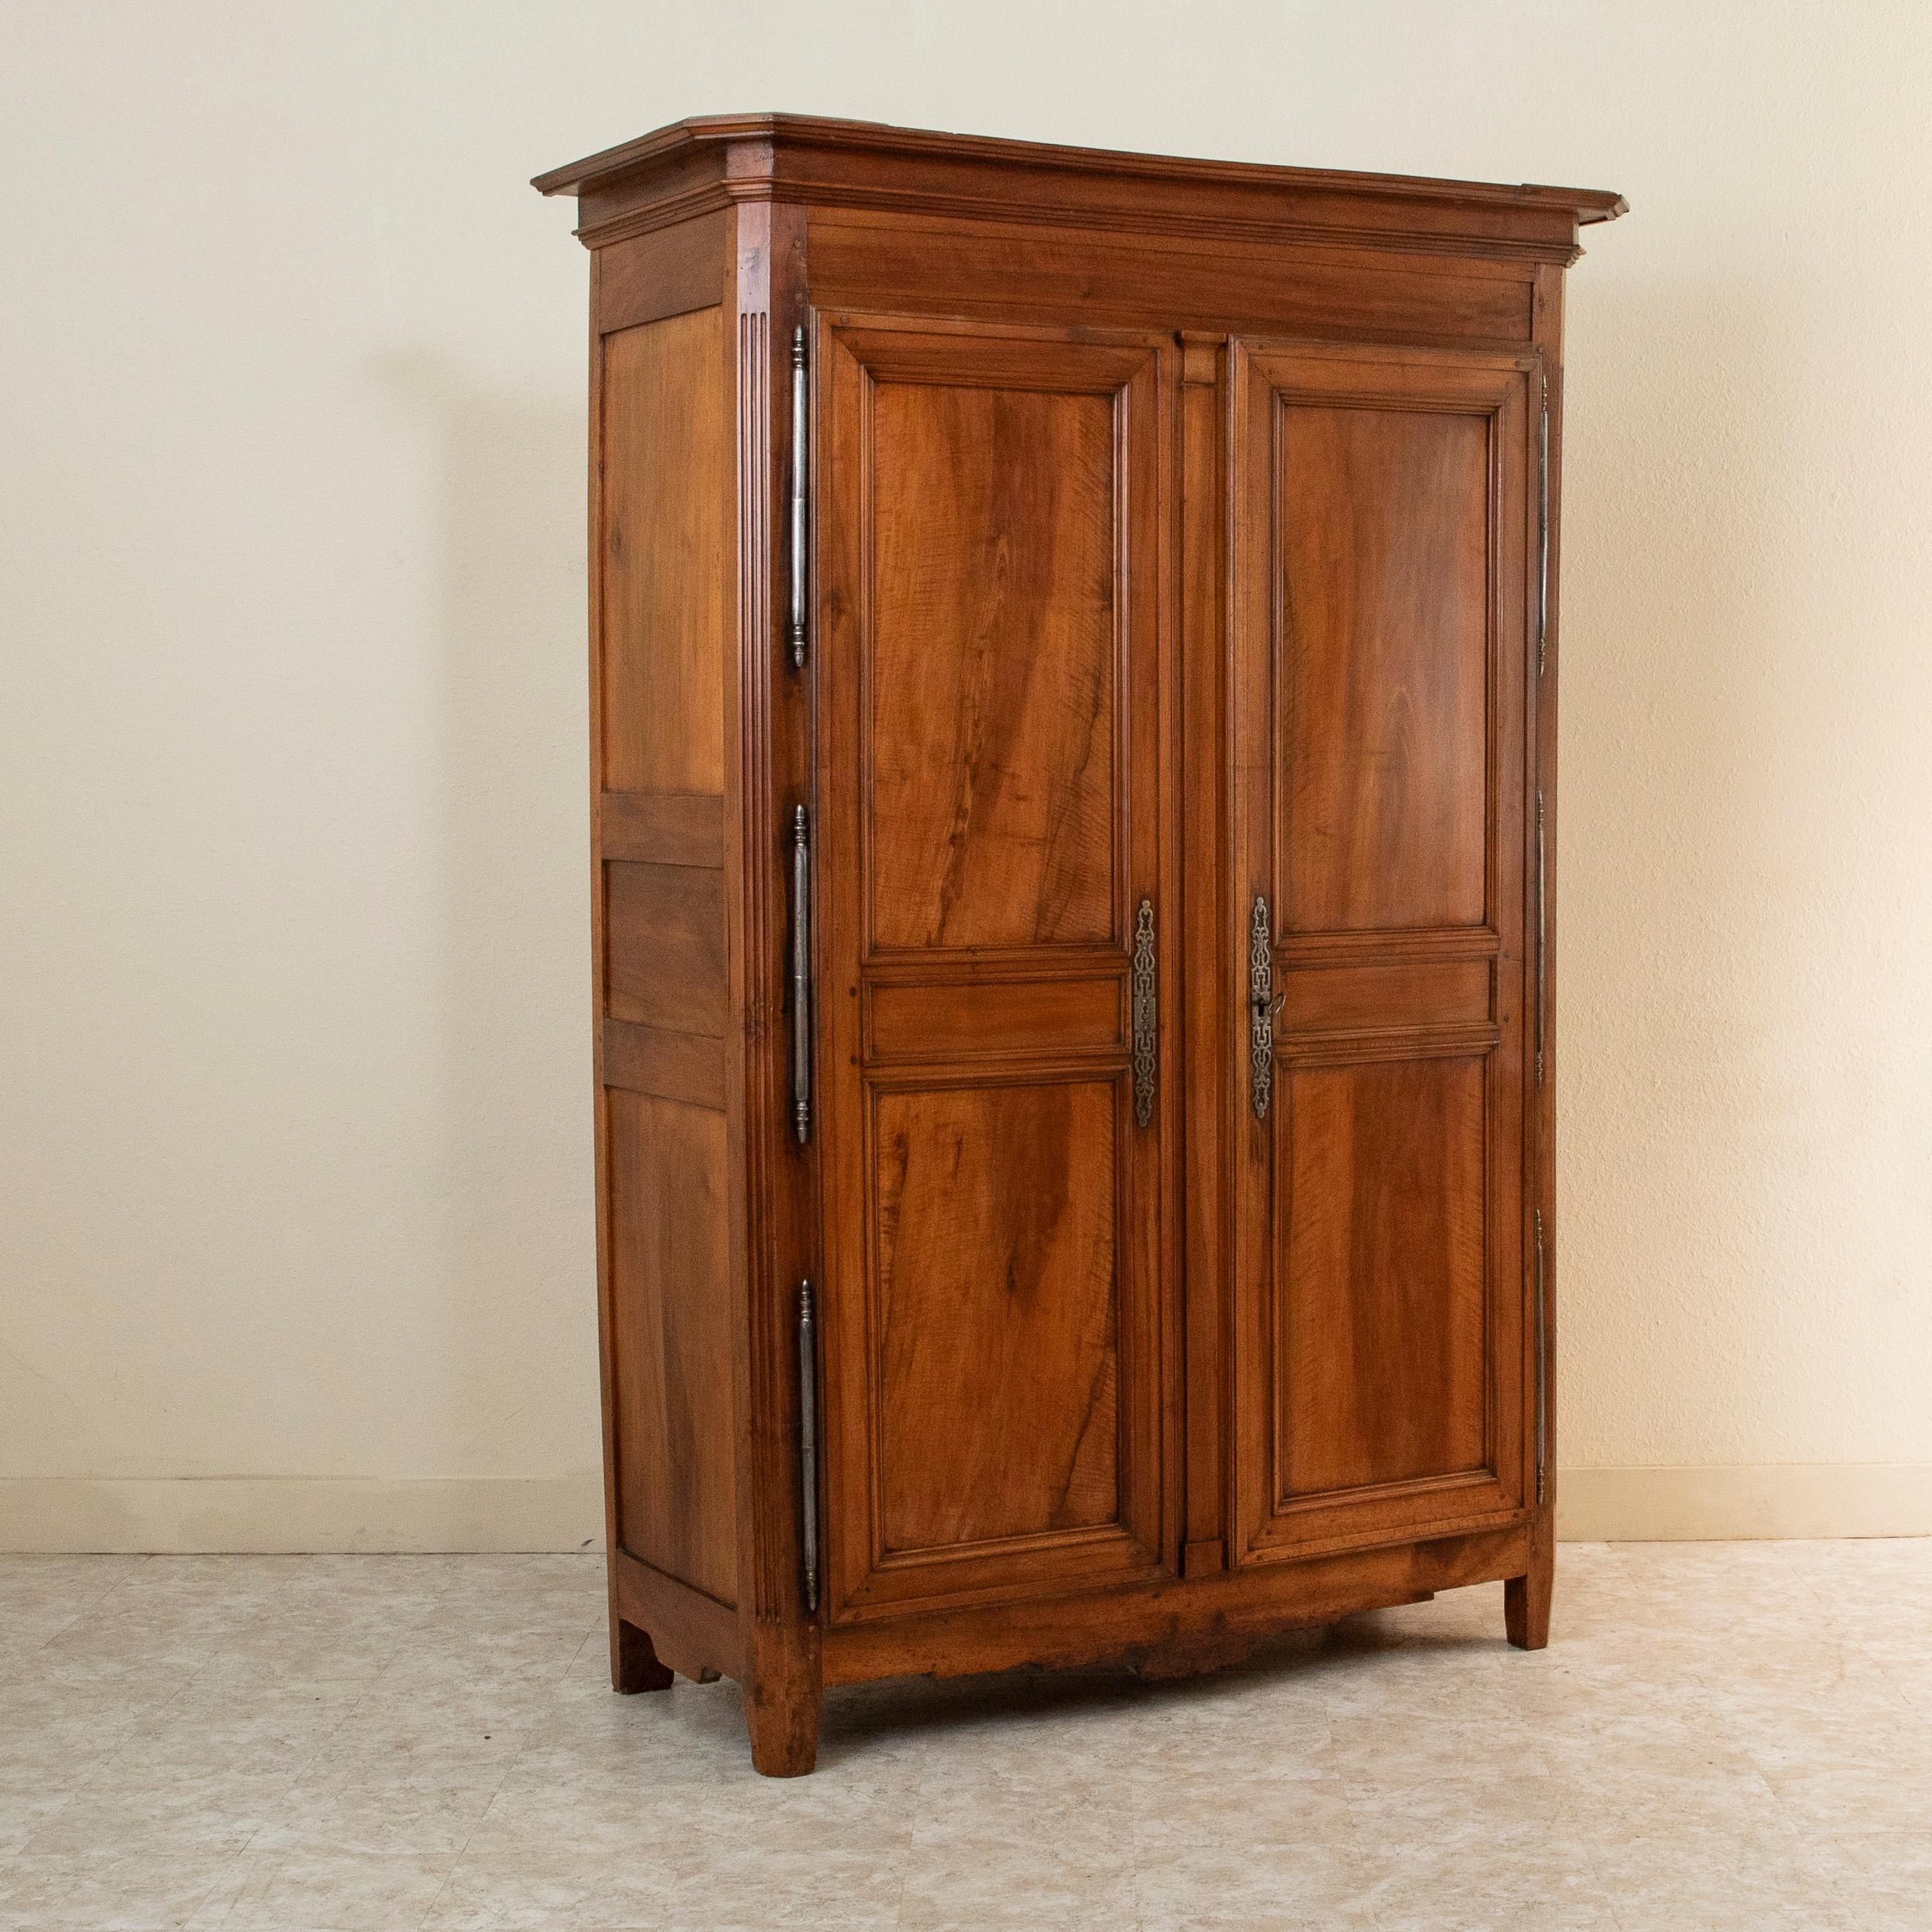 Standing at just over seven and a half feet in height, this late eighteenth century French Directoire period armoire is constructed of hand pegged paneled sides and doors of solid walnut. Found near the city of Bourges, France, this piece features